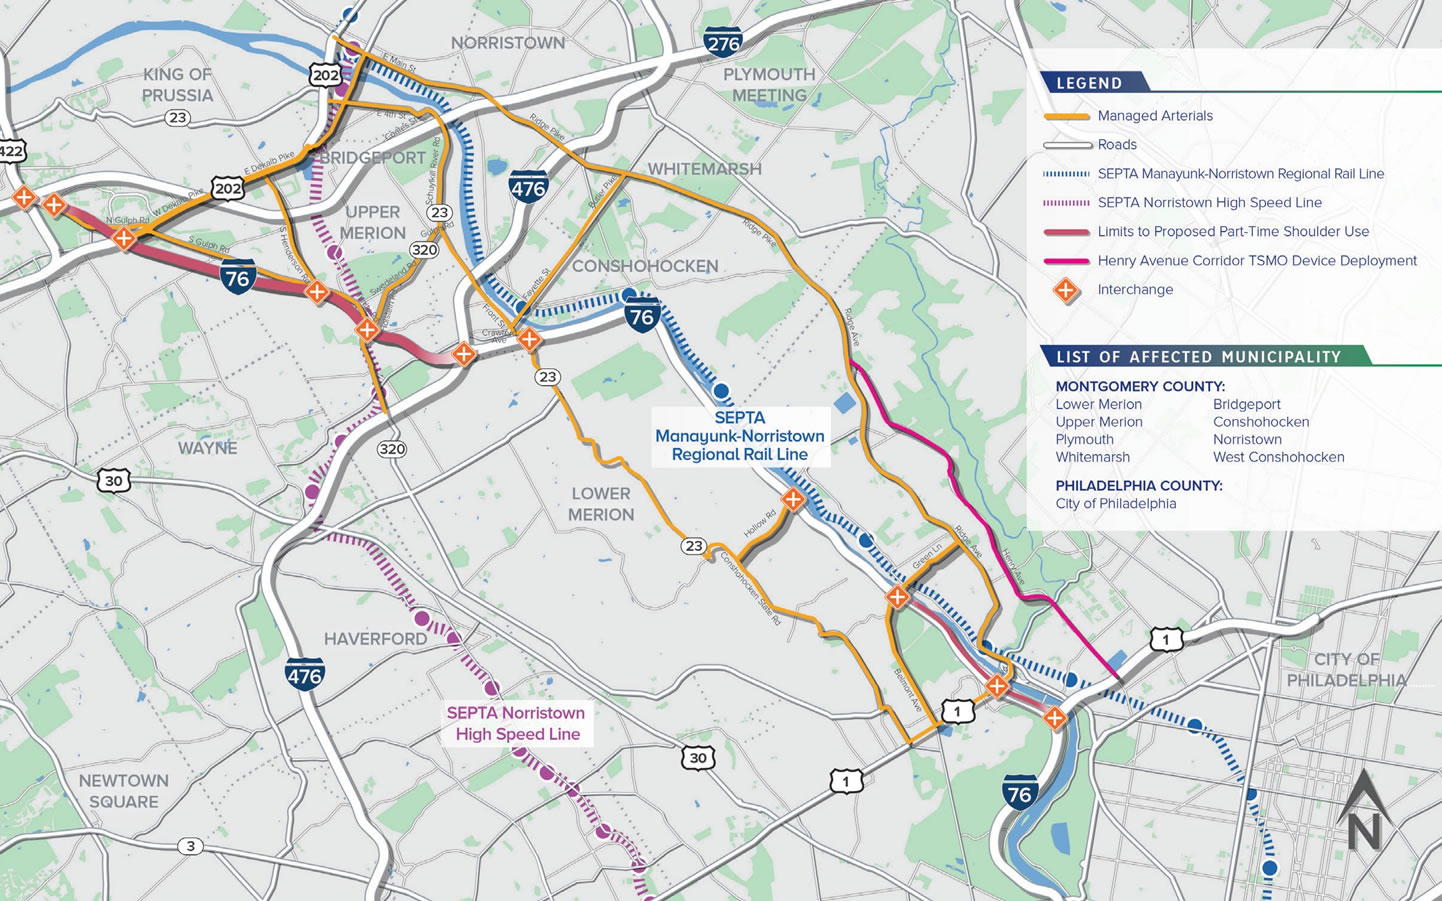 Map of proposed I-76 Corridor Project. With Rail line marked in blue, and the SEPTA Noristown High Speed Line marked in purple, and the part-time shoulder areas marked in red.